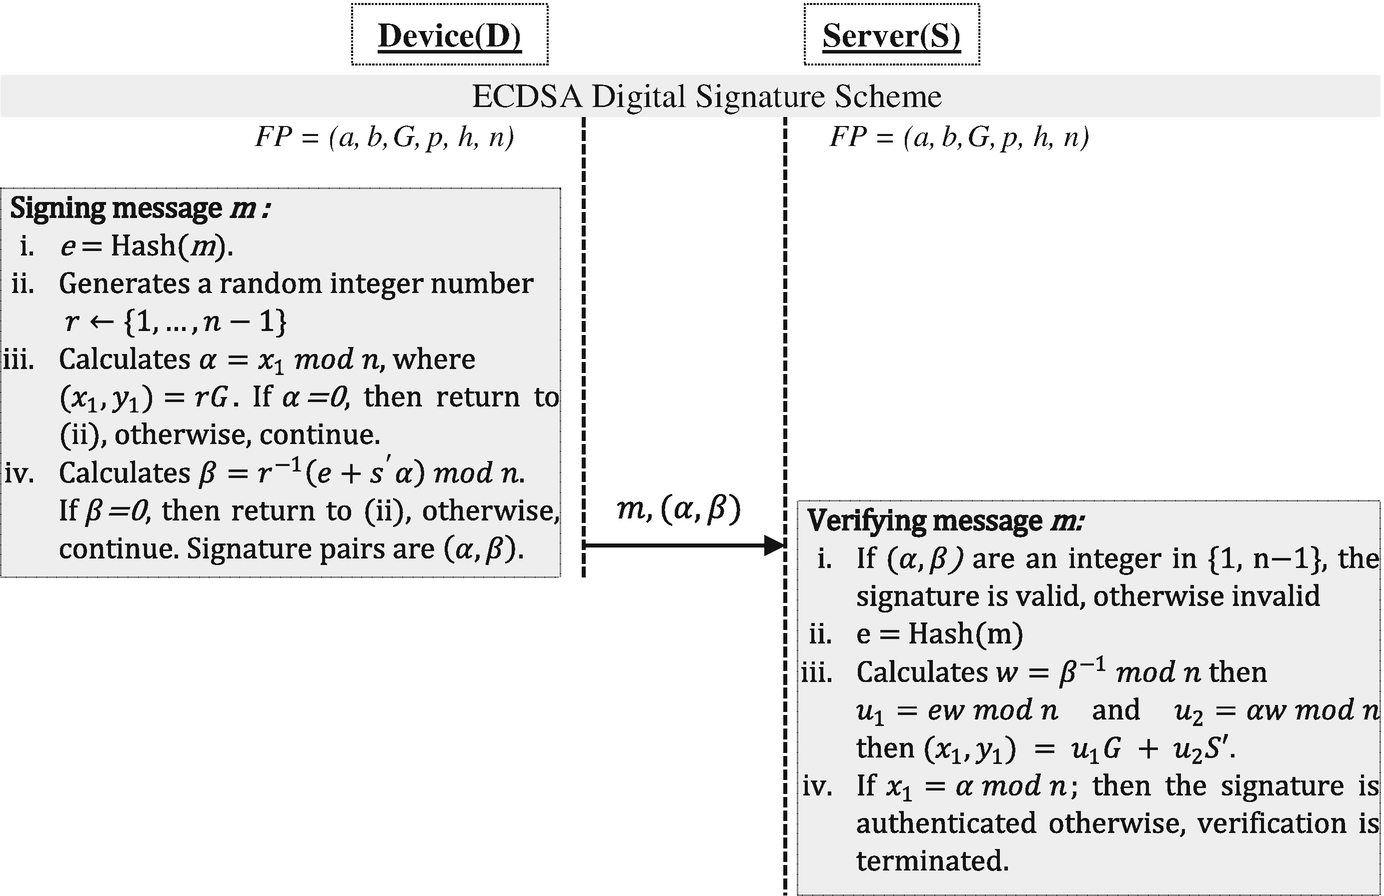 Tighten A Two Flight Mutual Authentication Protocol For Energy Constrained Devices Springerlink